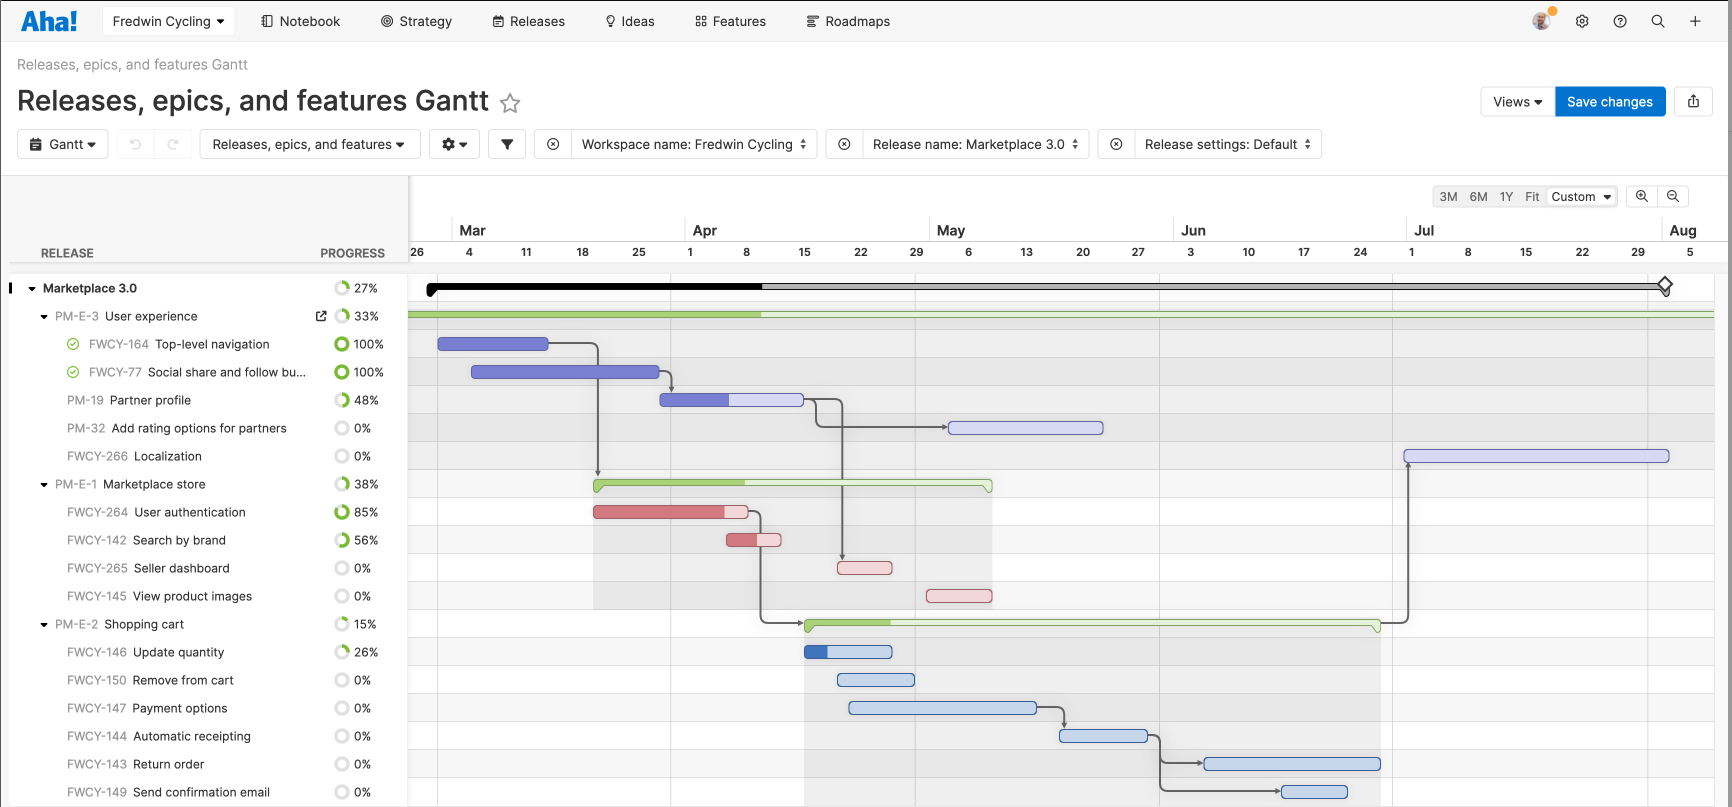 Make sure you have enabled epics in your workspace before you create a Releases, epics, and features Gantt view.